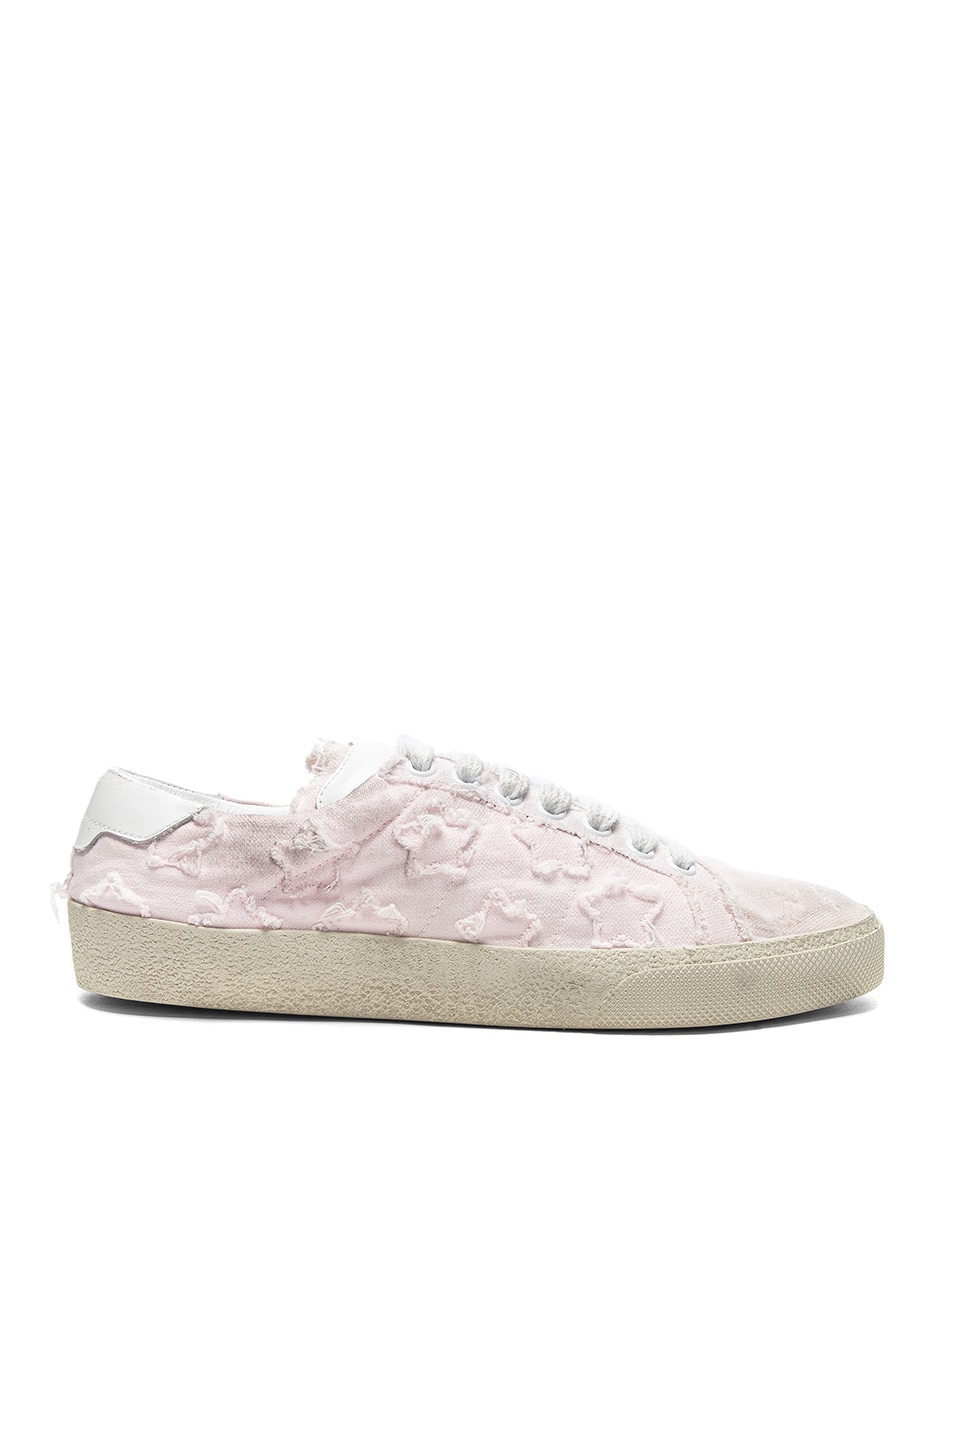 Image 1 of Saint Laurent Court Classic Star Leather Sneakers in Washed Pink & Optic White